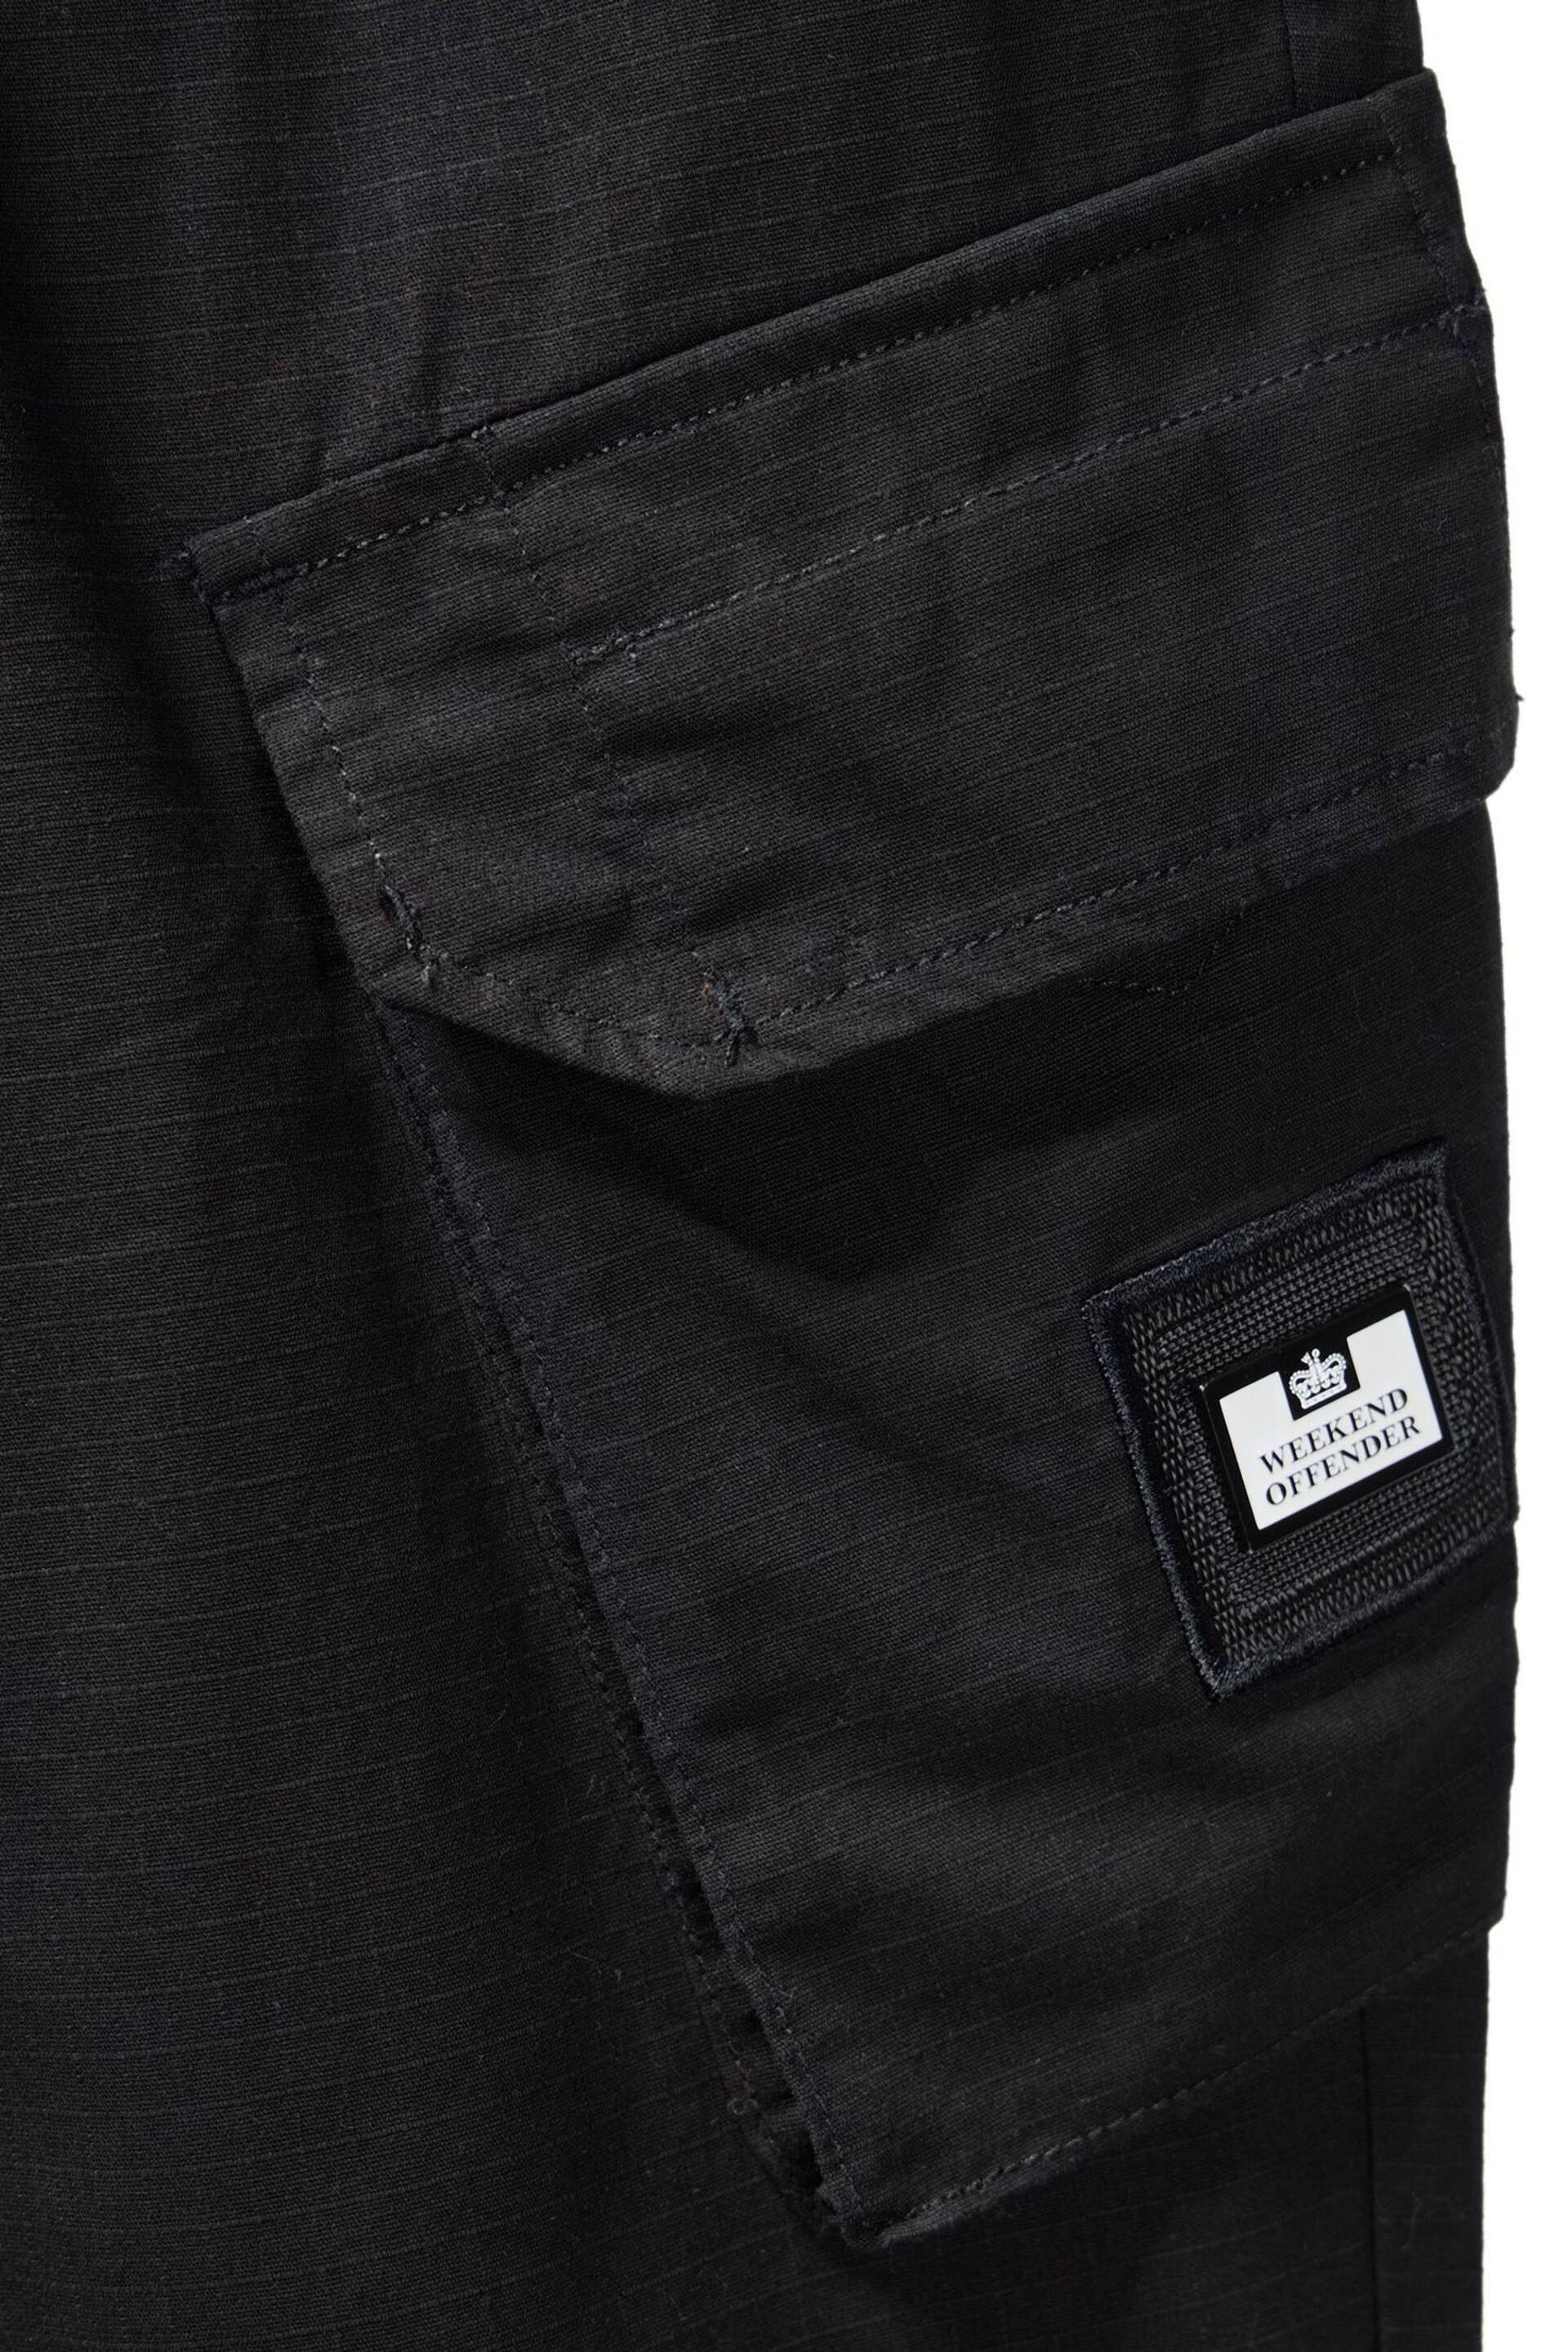 Weekend Offender Pianamo Cargo Trousers - Image 7 of 7